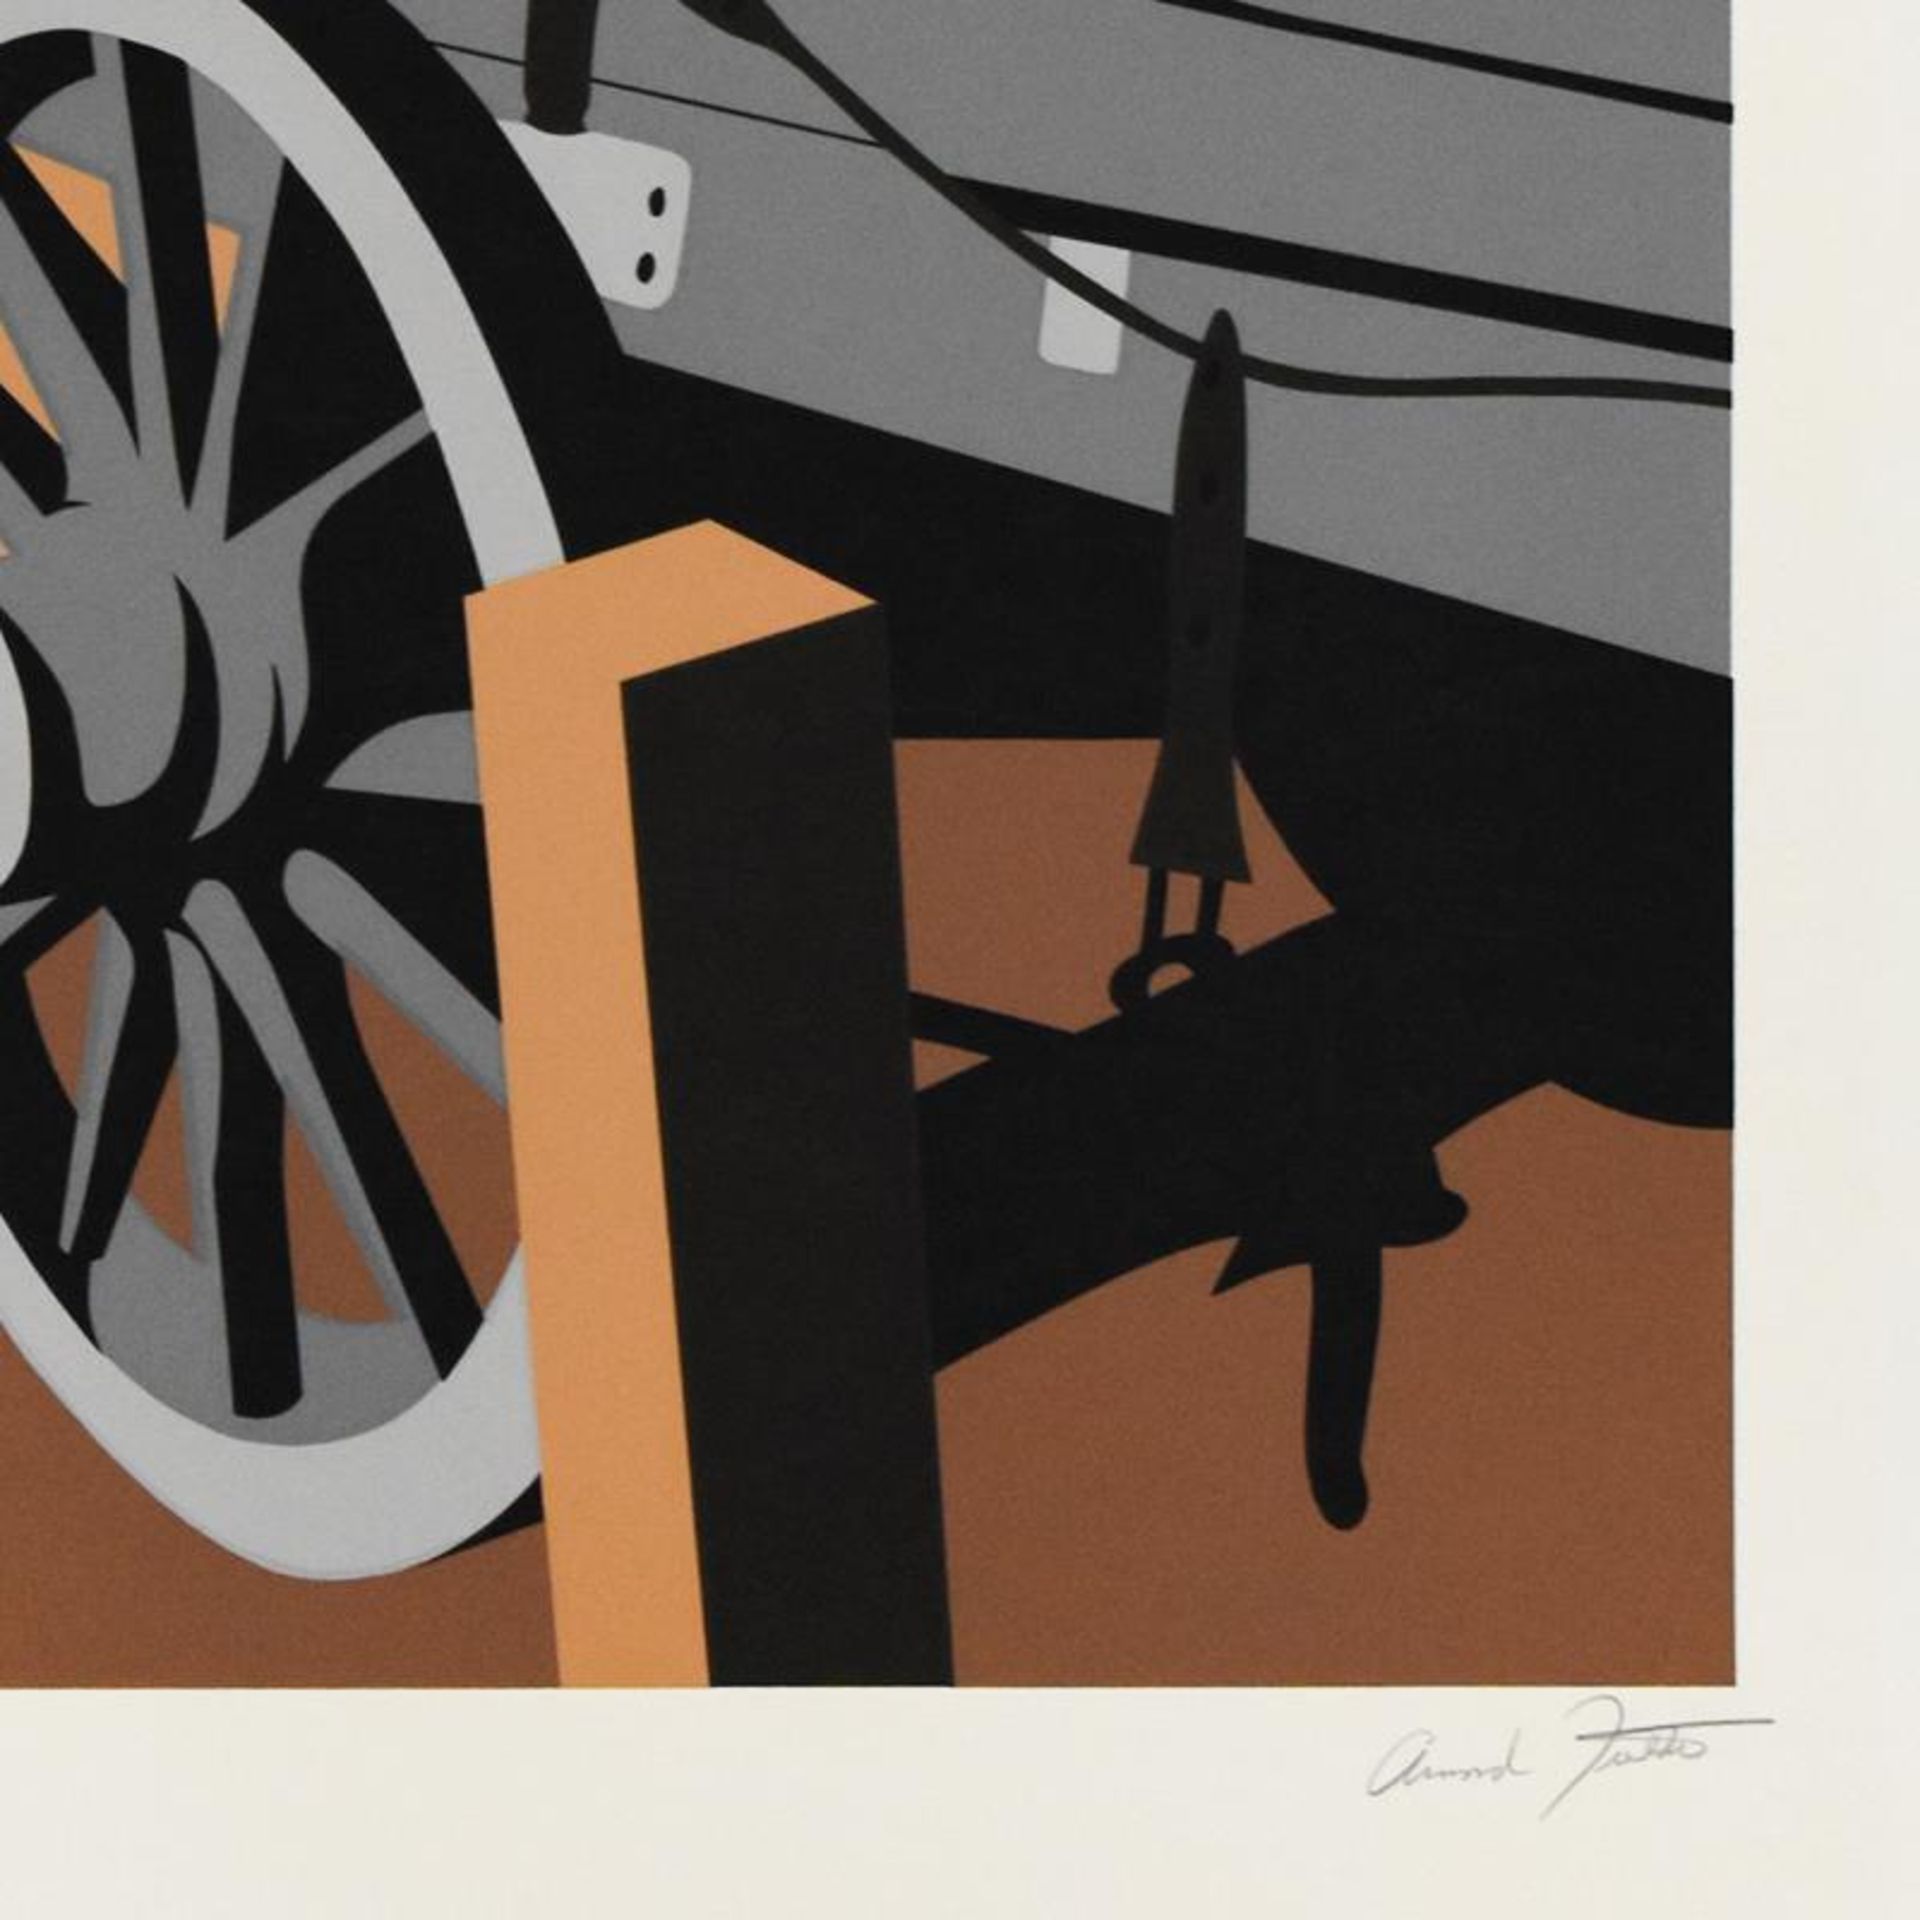 Armond Fields (1930-2008), "Wagon Wheel" Limited Edition Hand Pulled Original Se - Image 2 of 2